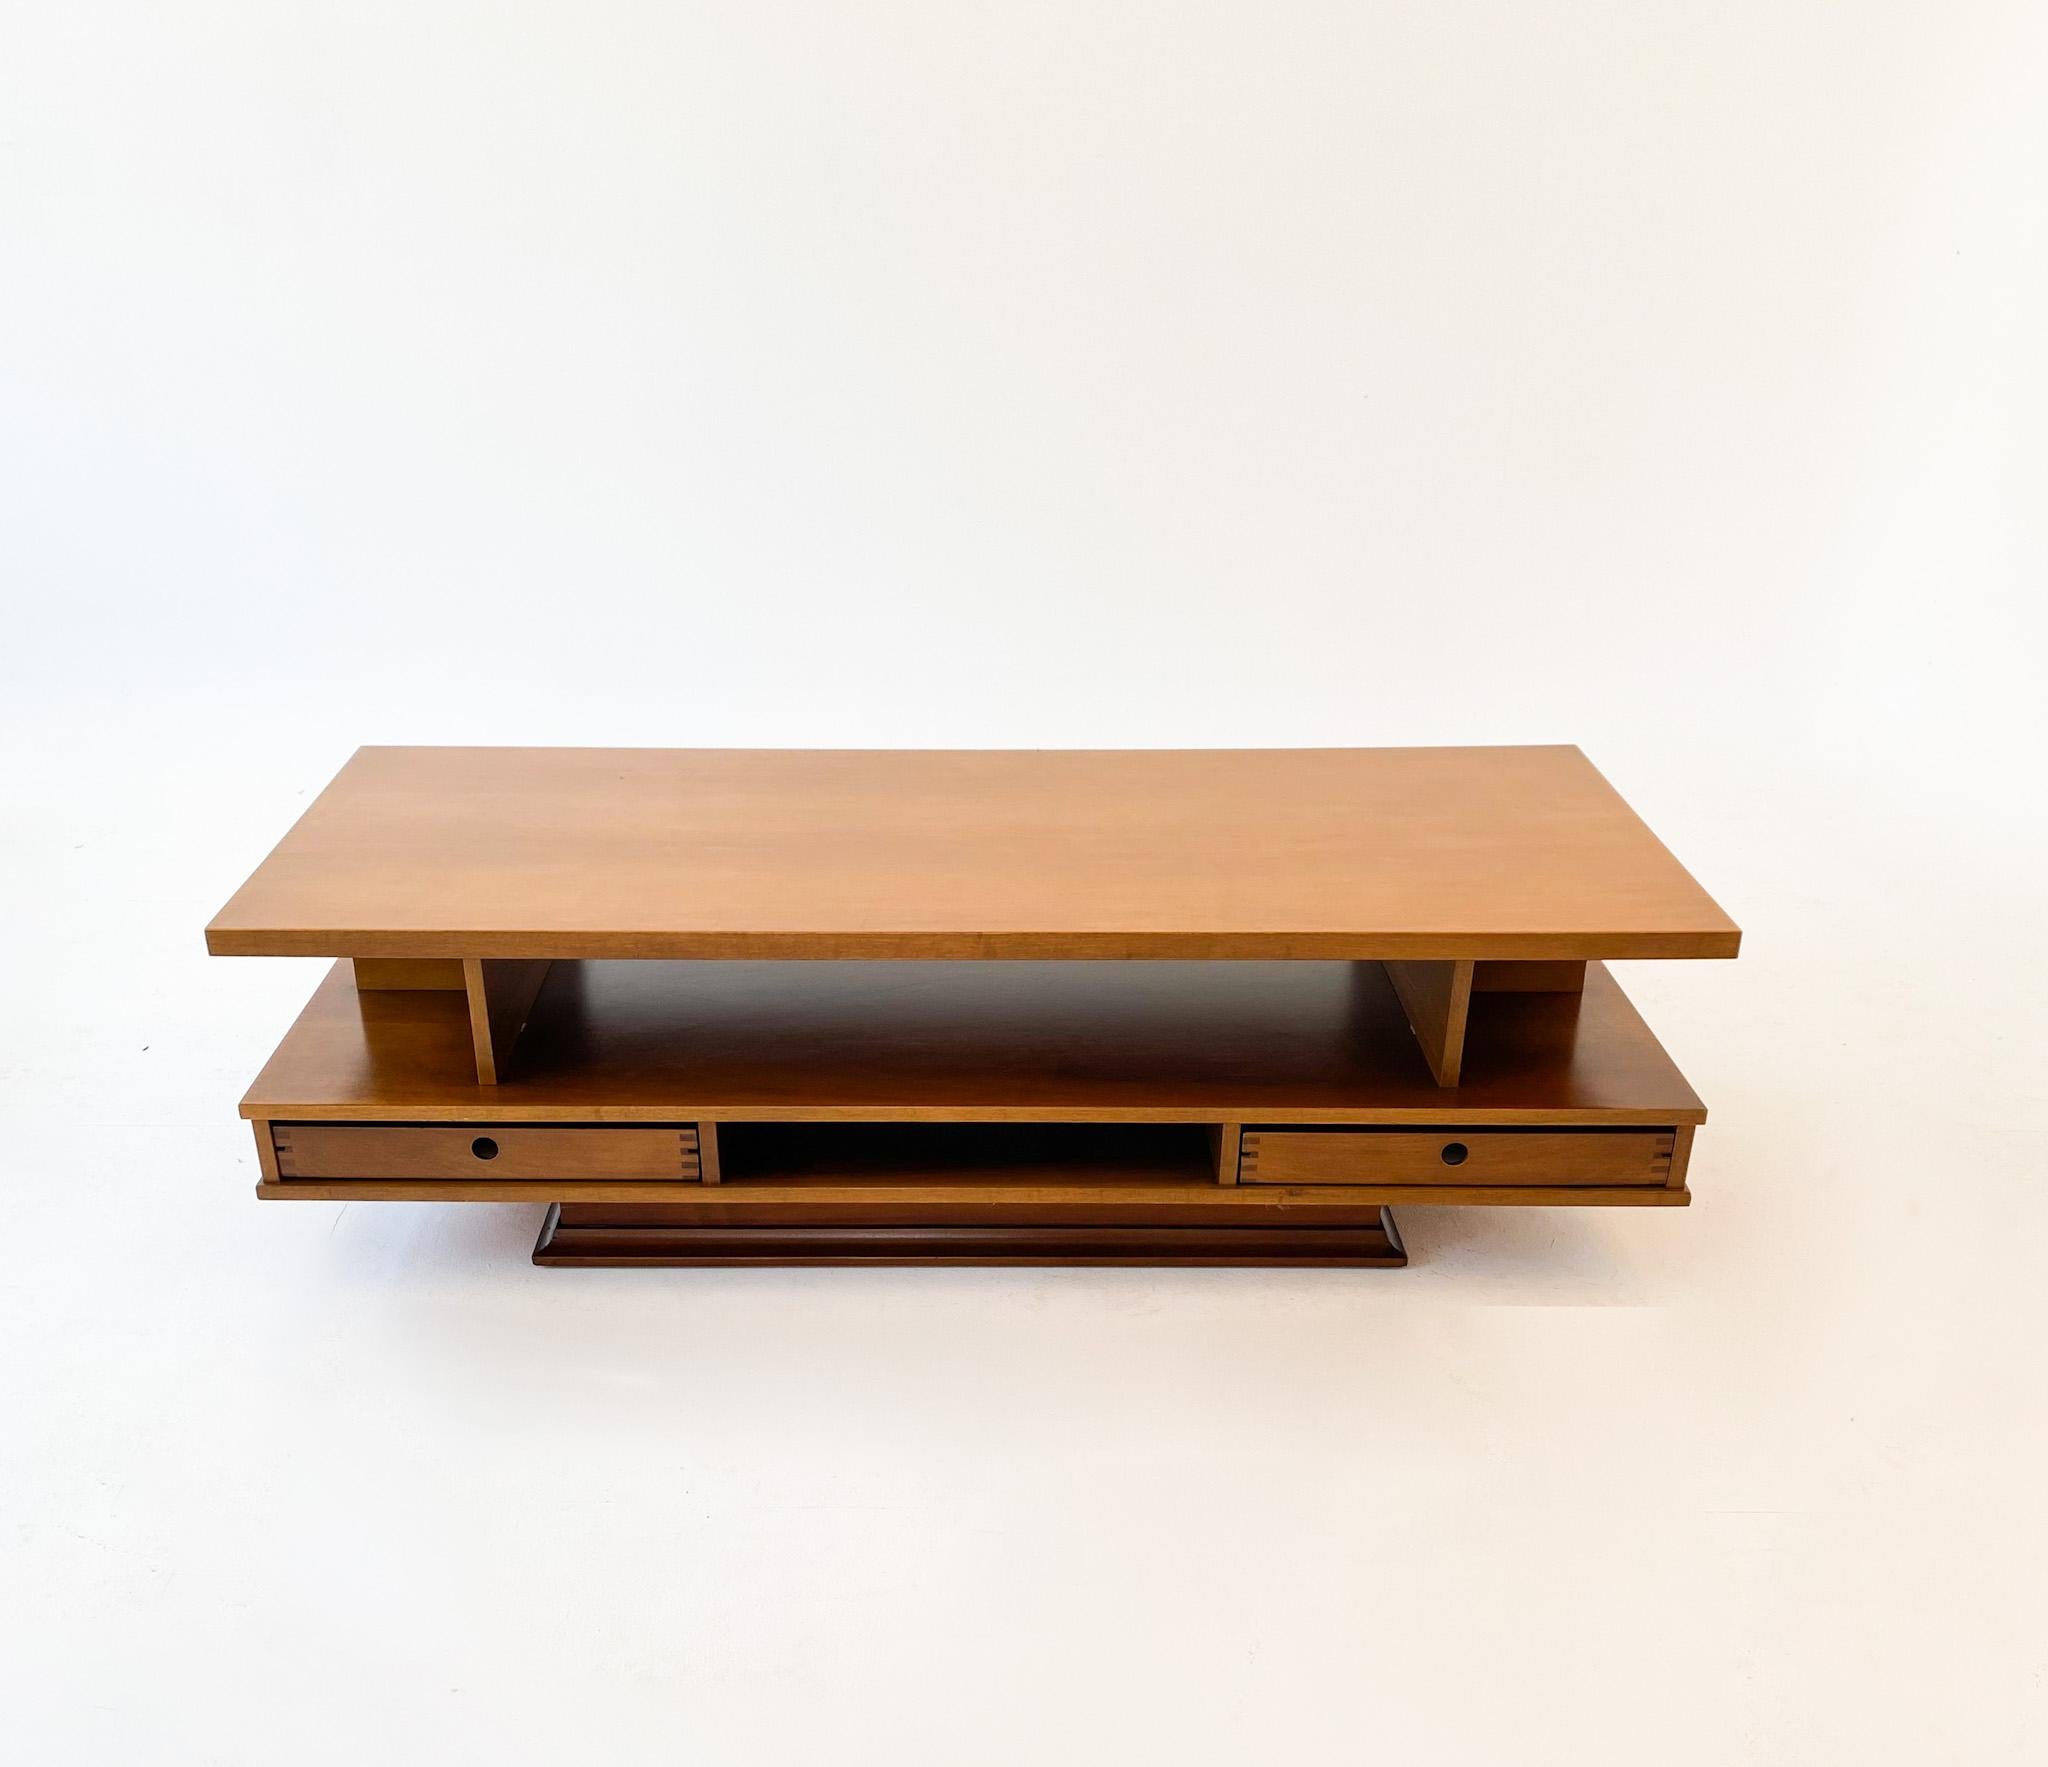 Mid-Century Modern wooden coffee table by Claudio Salocchi for Sormani, Italy 1960s.

This elegant coffee or side table by the Italian Designer and Architect Claudio Salocchi in blond walnut offers two small drawers that can be opened to either